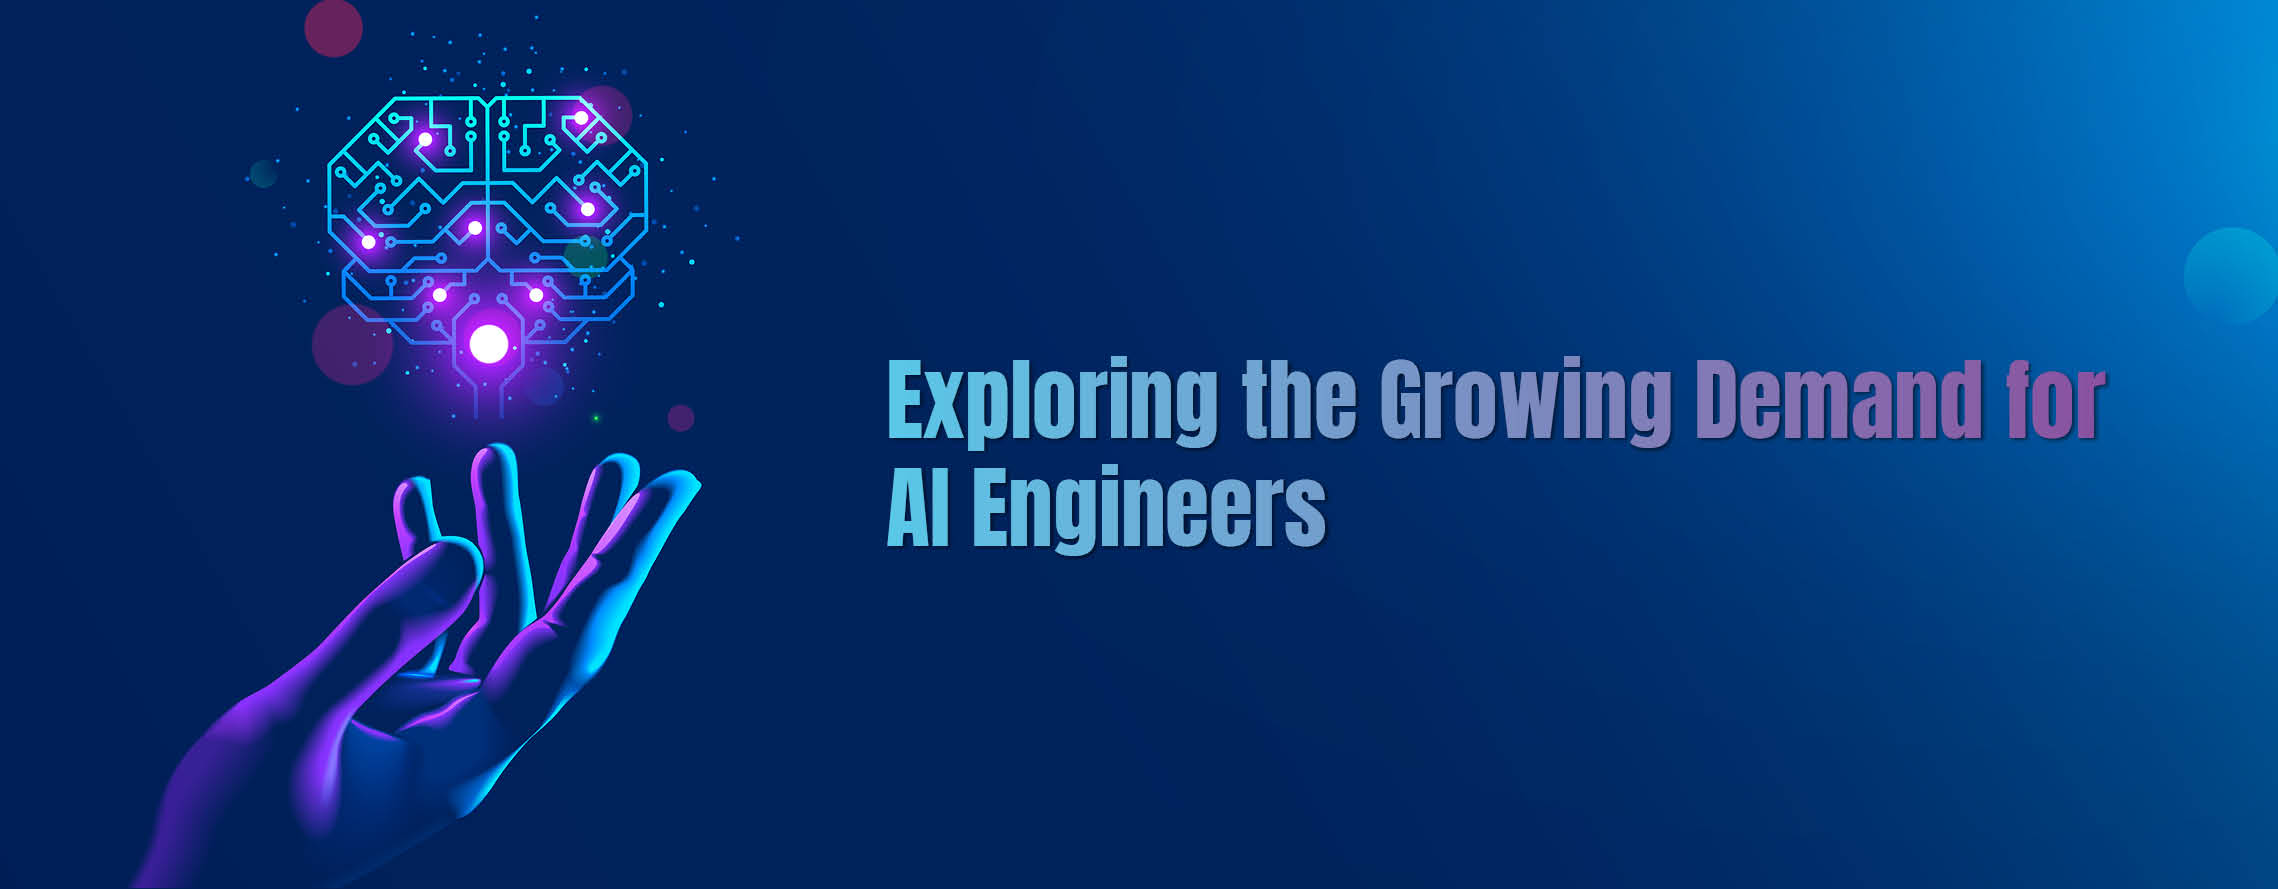 Exploring the Growing Demand for AI Engineers